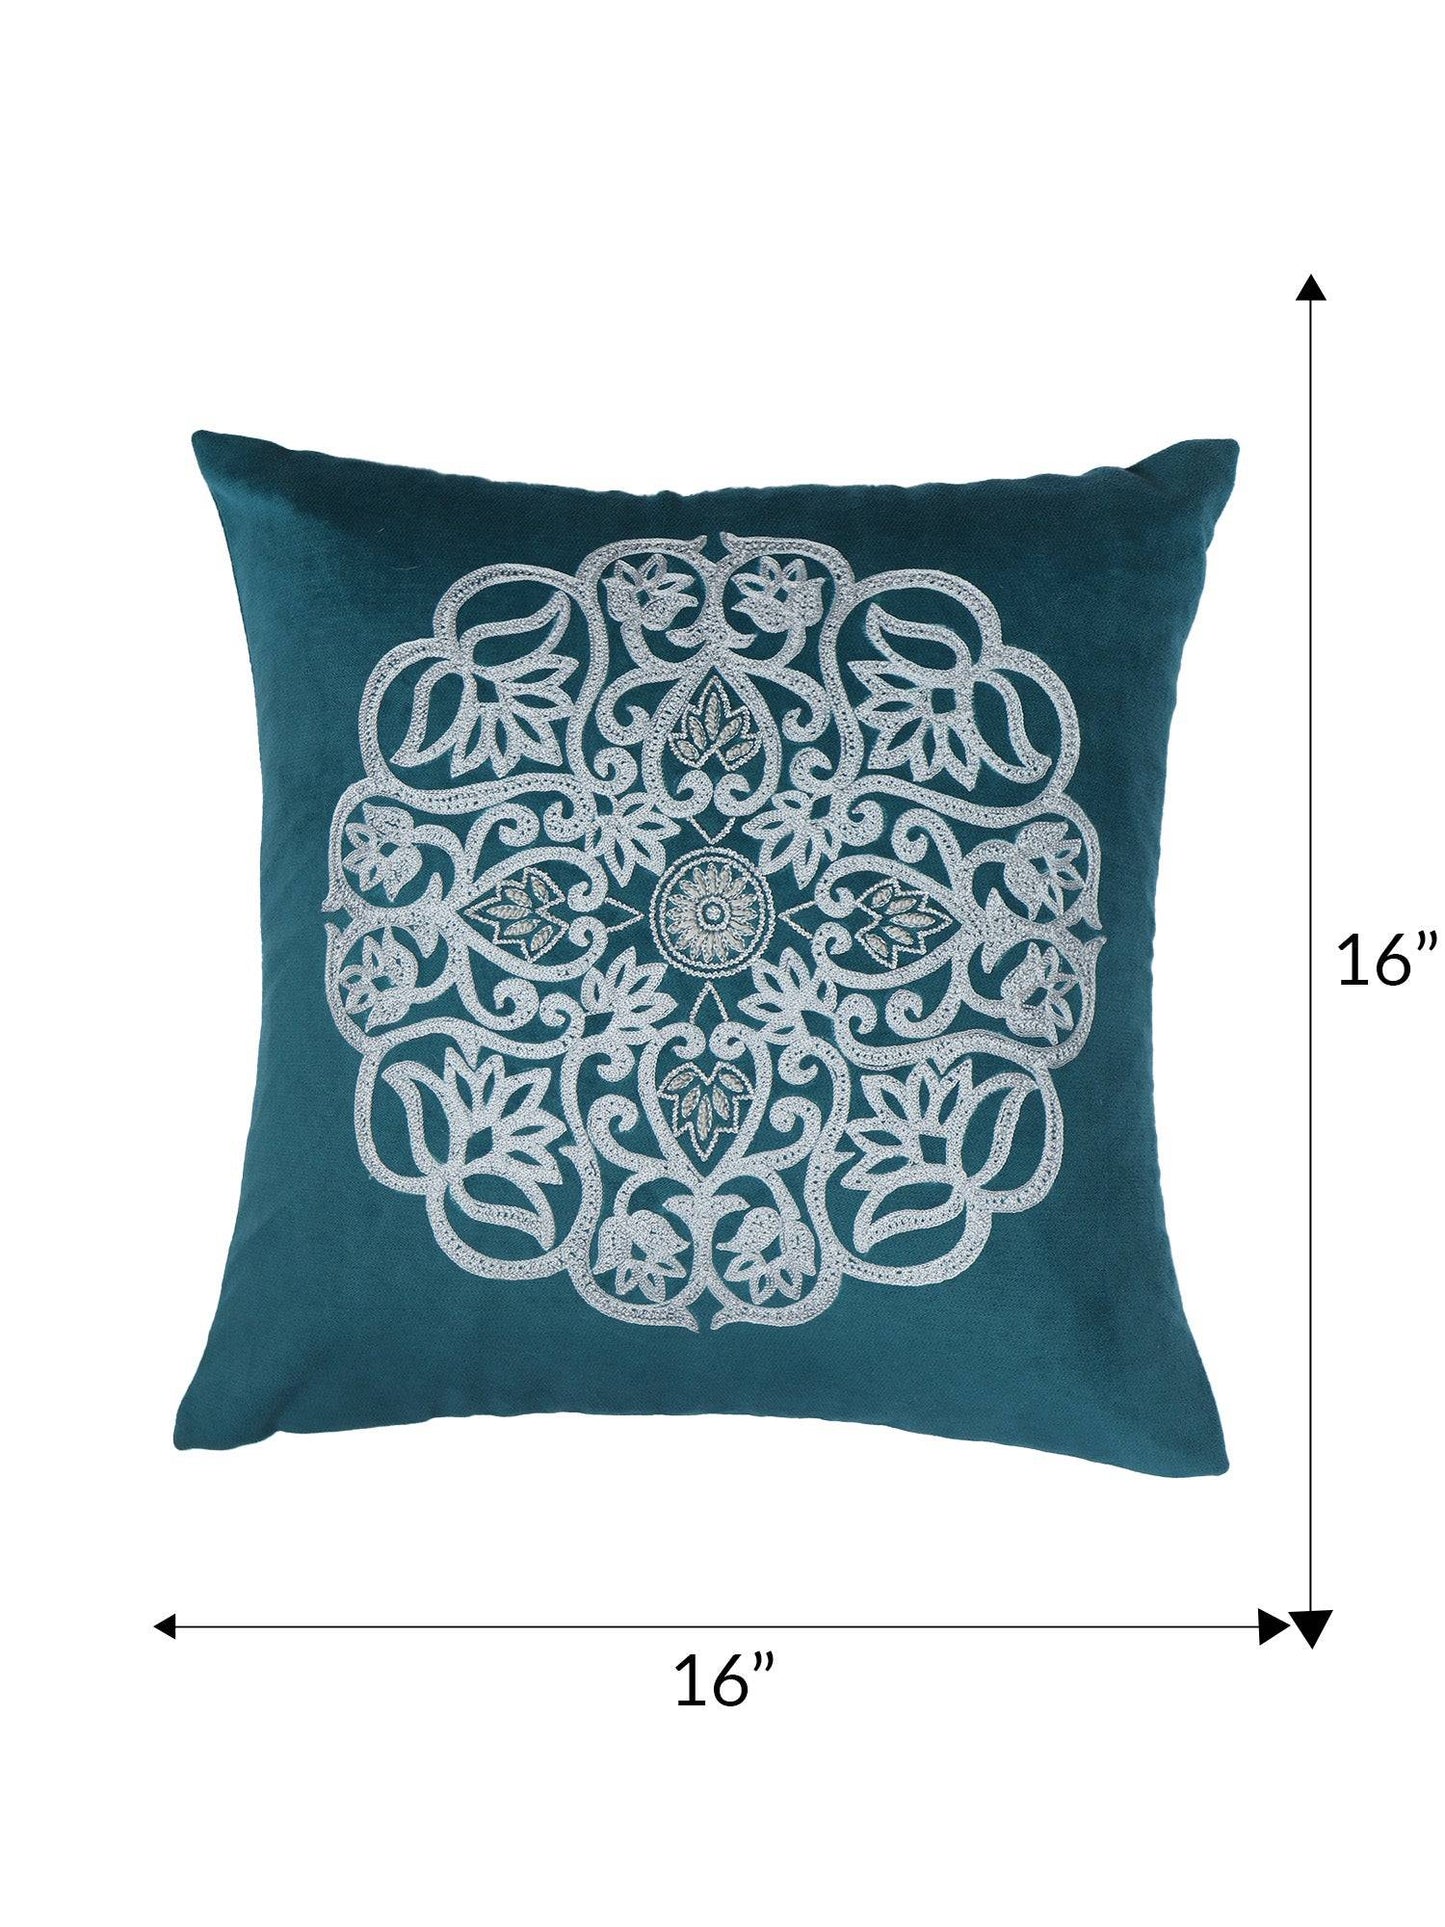 ZEBA World Hand Embroidered Cushion Cover - Luxe Collection | Sofa, Bedroom, Couch | Polycanvas Motif Embroidery - Teal Blue - 16x16 inch (40x40 cms) (Pack of 1)